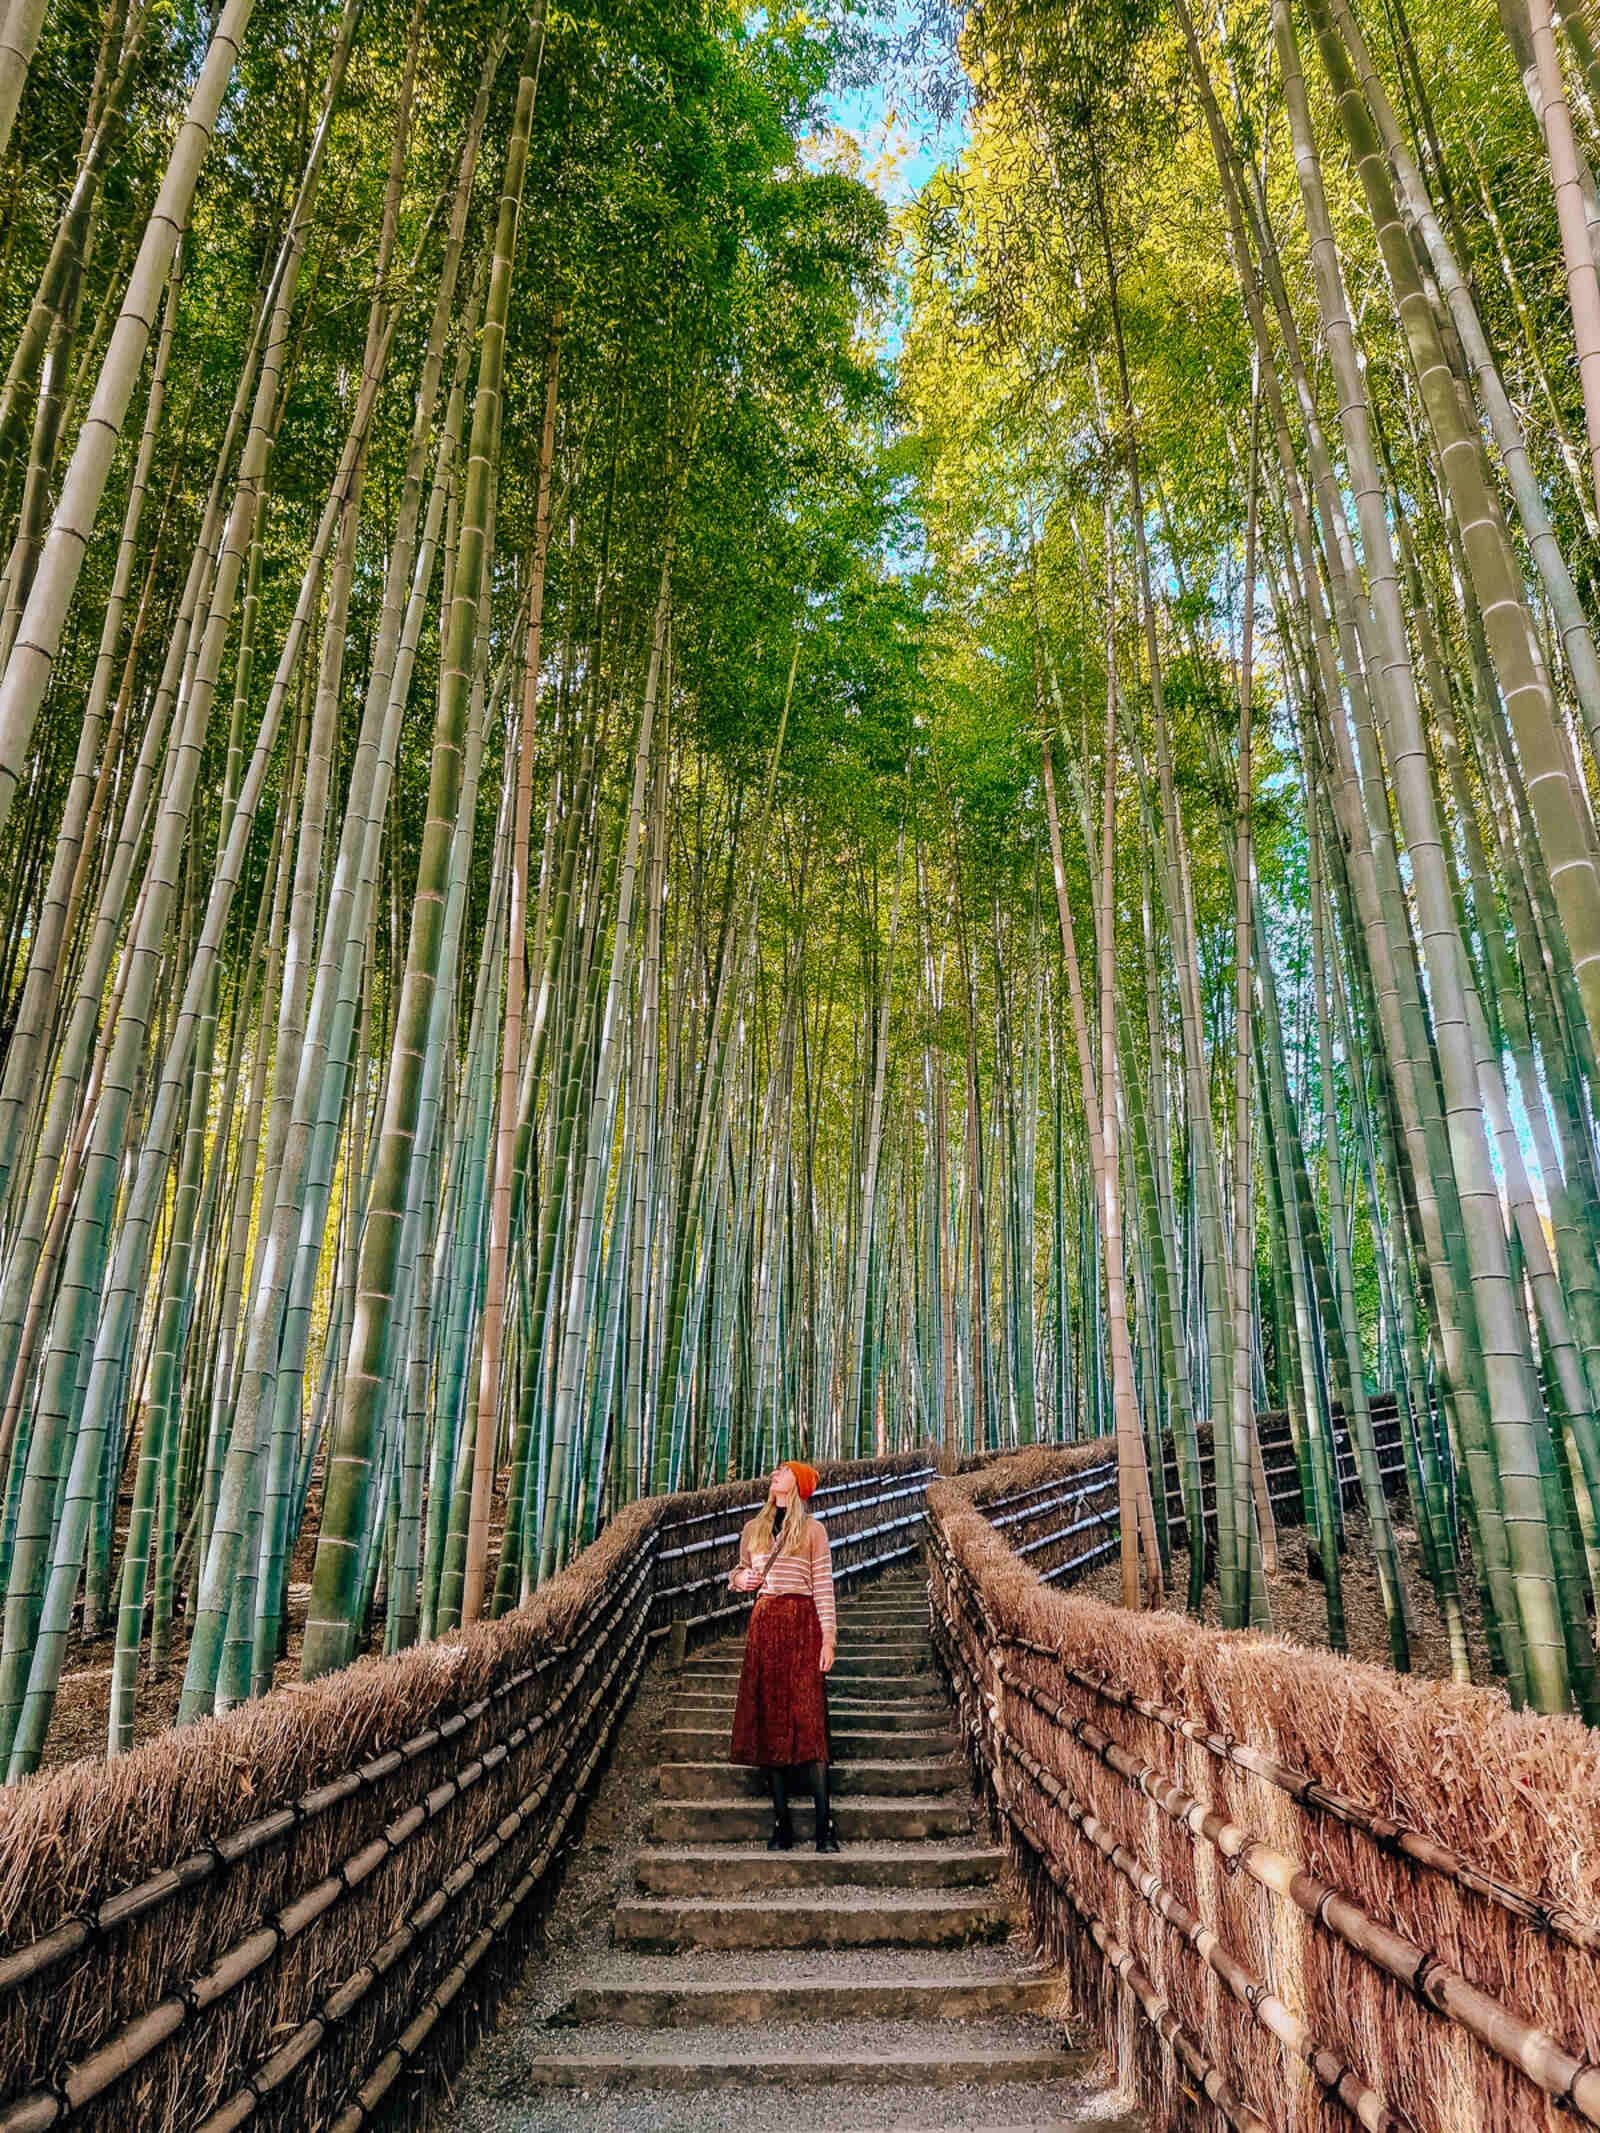 Helena standing on steps surrounded by a bamboo forest that is tall and vilbrant green